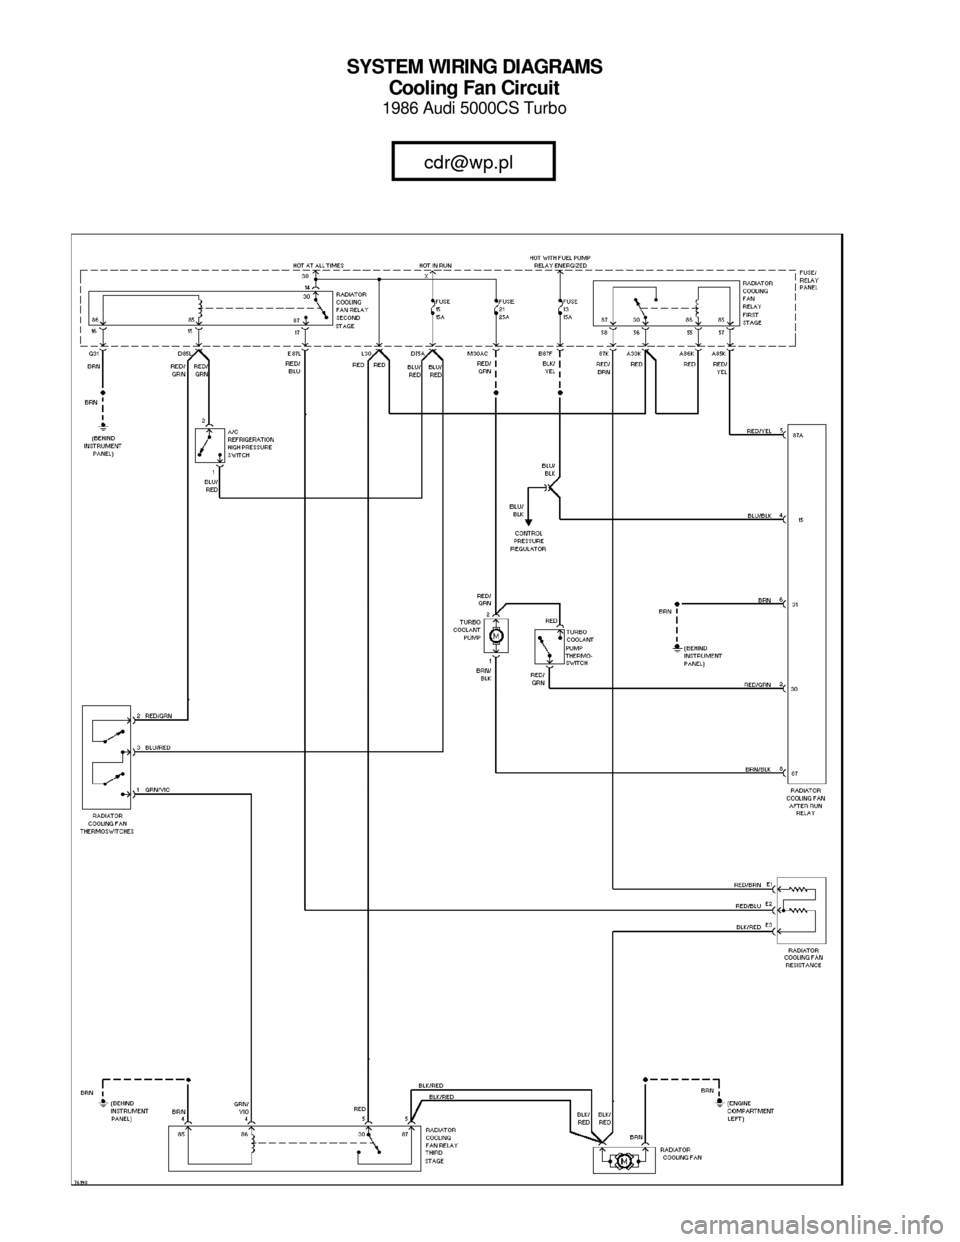 AUDI 5000CS 1986 C2 System Wiring Diagram SYSTEM WIRING DIAGRAMS
Cooling Fan Circuit
1986 Audi 5000CS Turbo
For x    
Copyright © 1998 Mitchell Repair Information Company, LLCMonday, July 19, 2004  05:51PM 